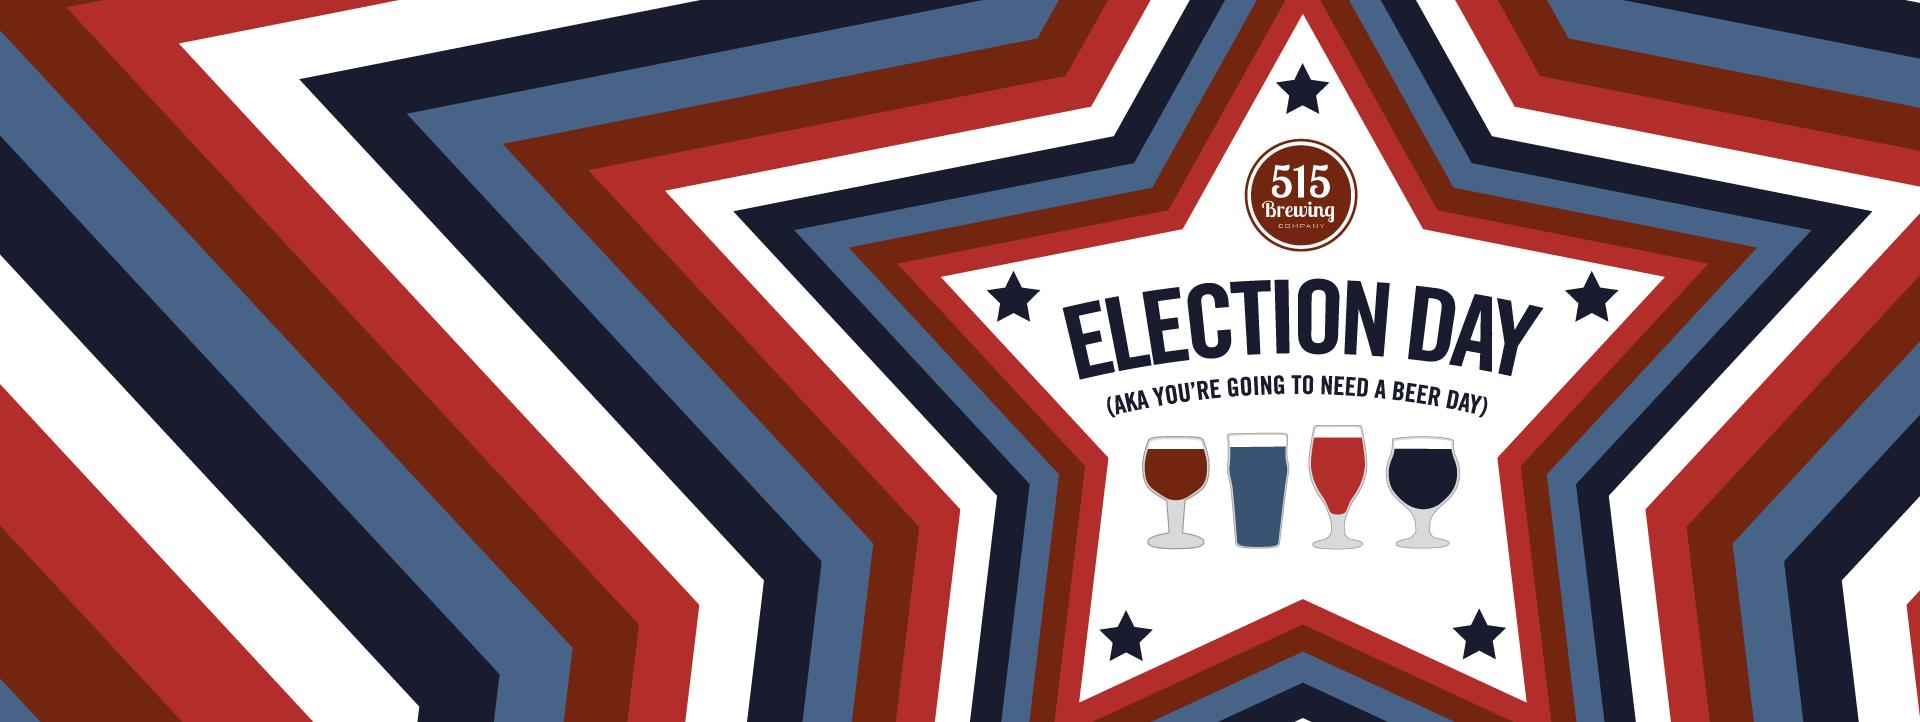 515 Brewing Company Election Day Beer Sale 2020